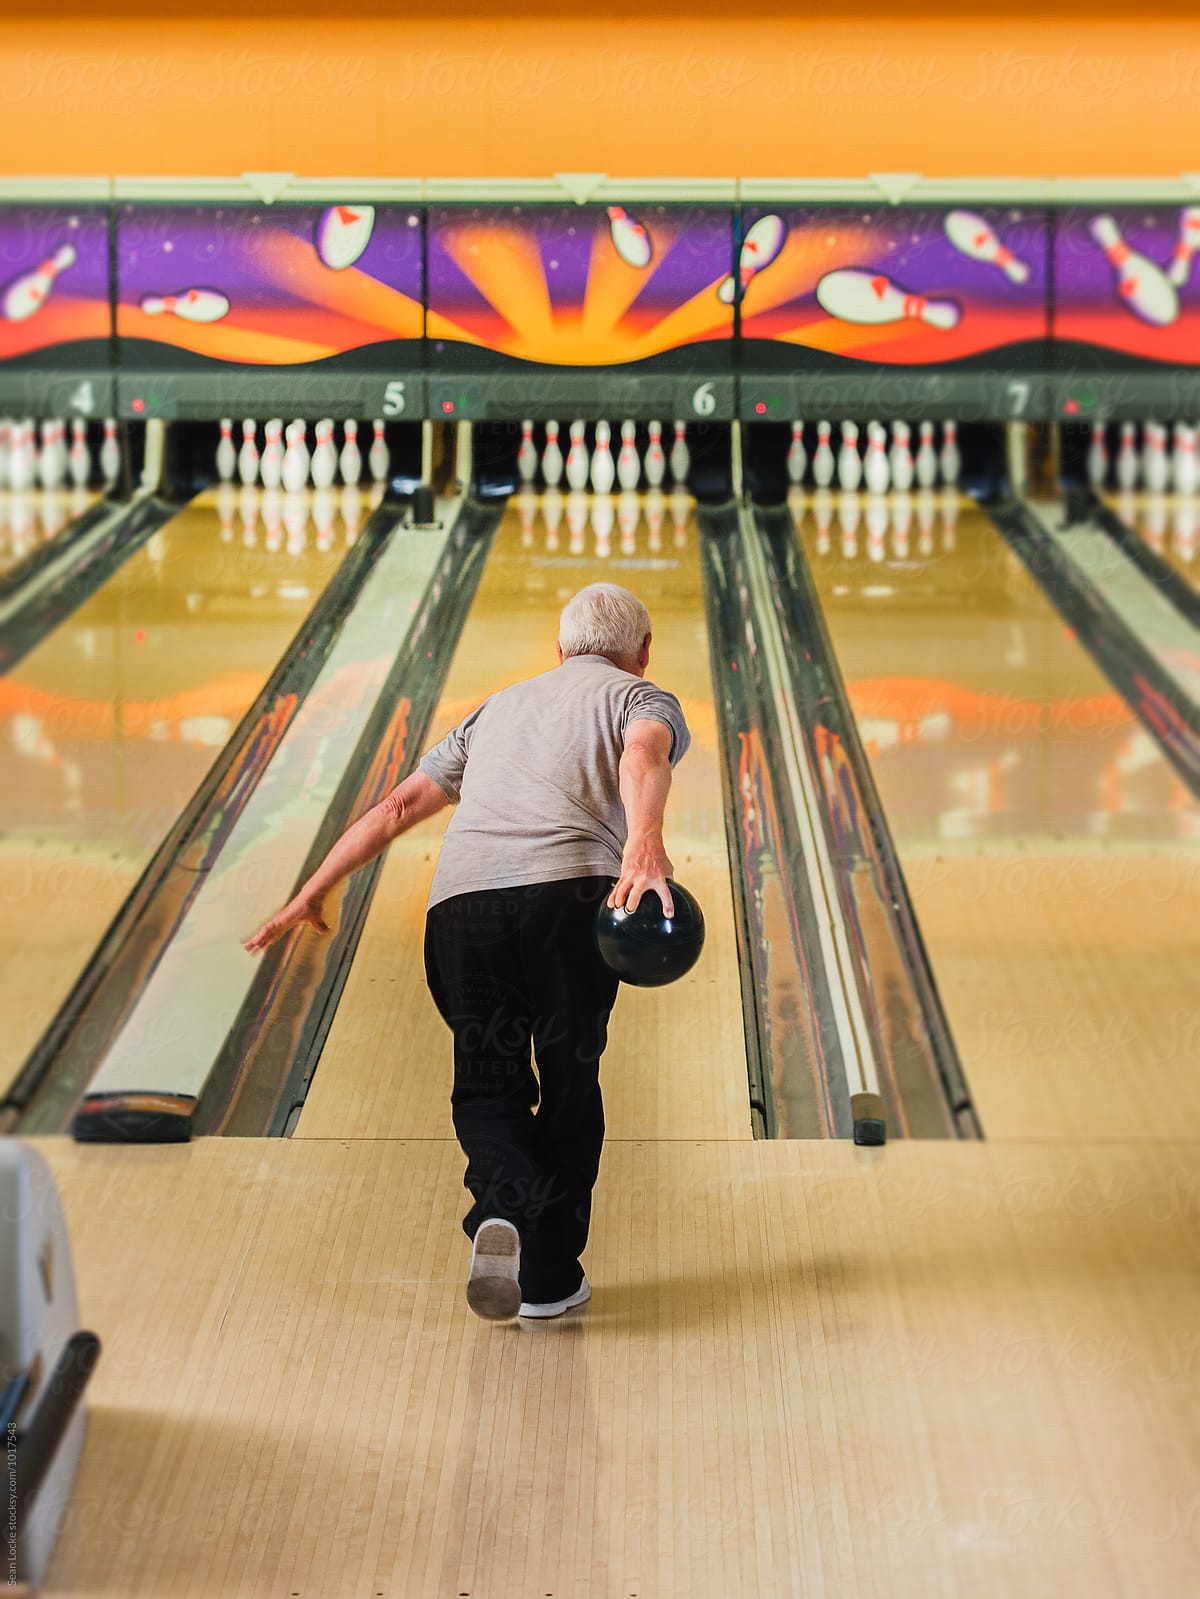 Bowling: Mature Male Bowler About To Bowl A Strike